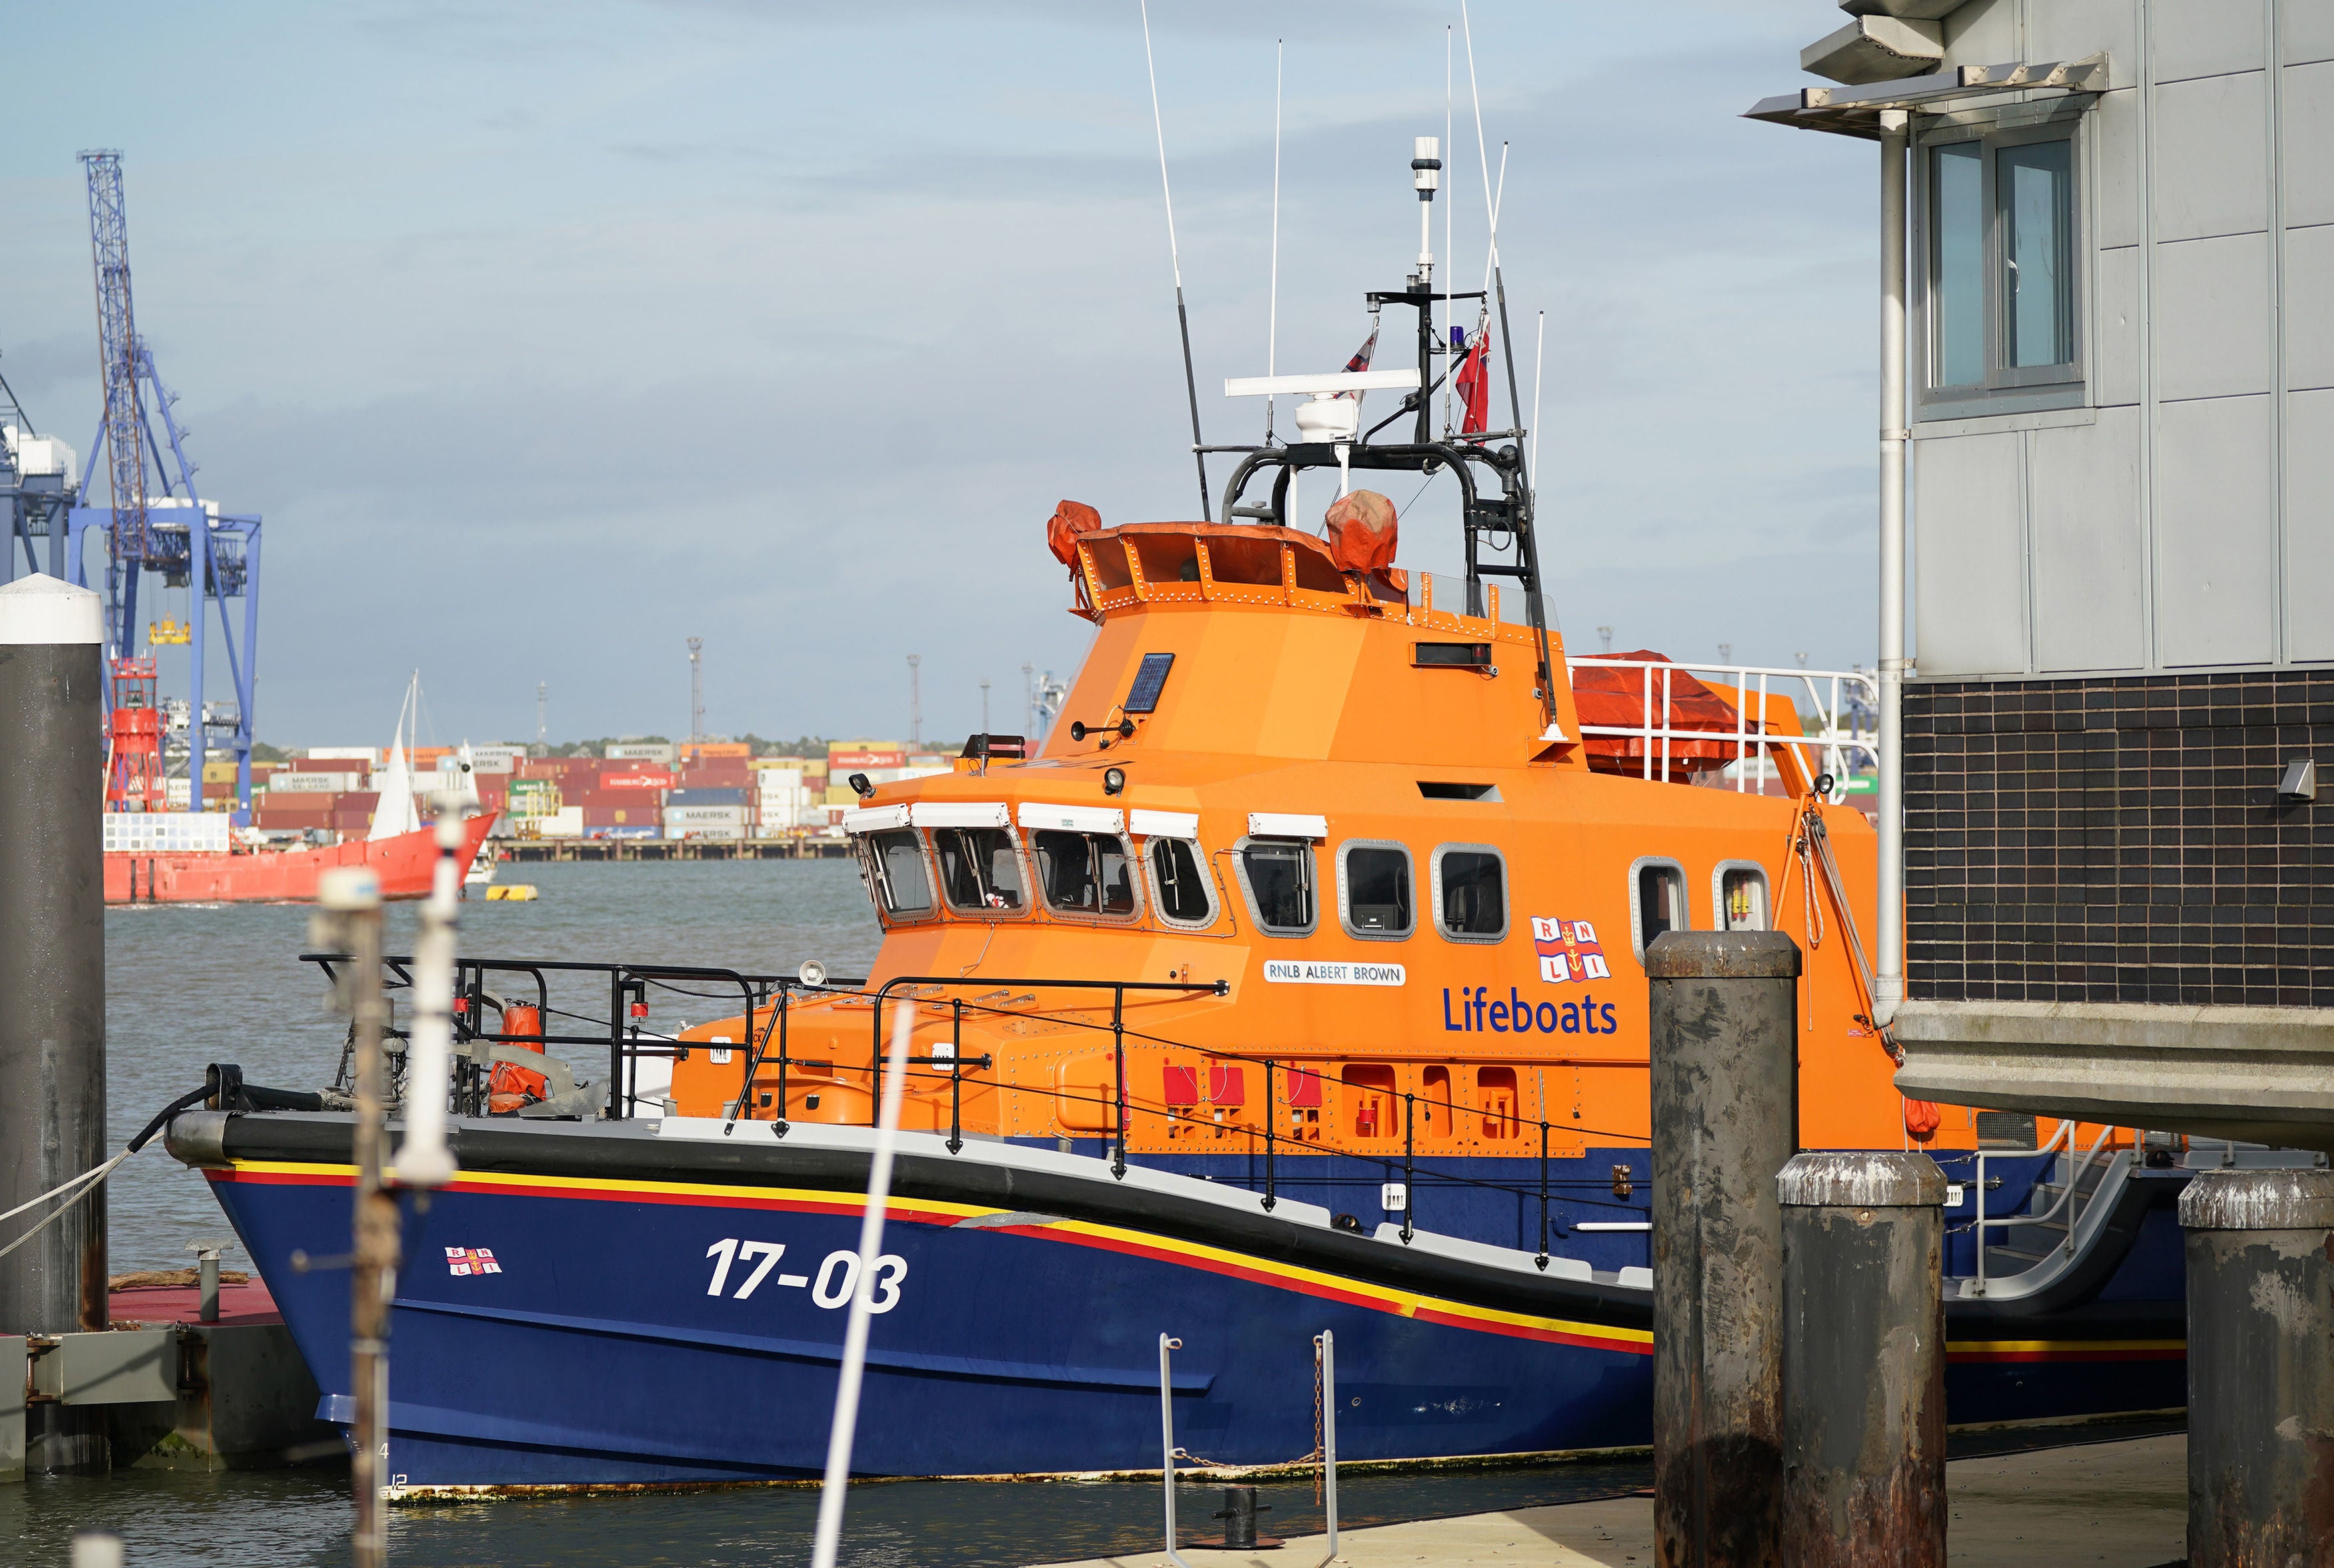 The search operation involved the RNLI, Coastguard and Border Force